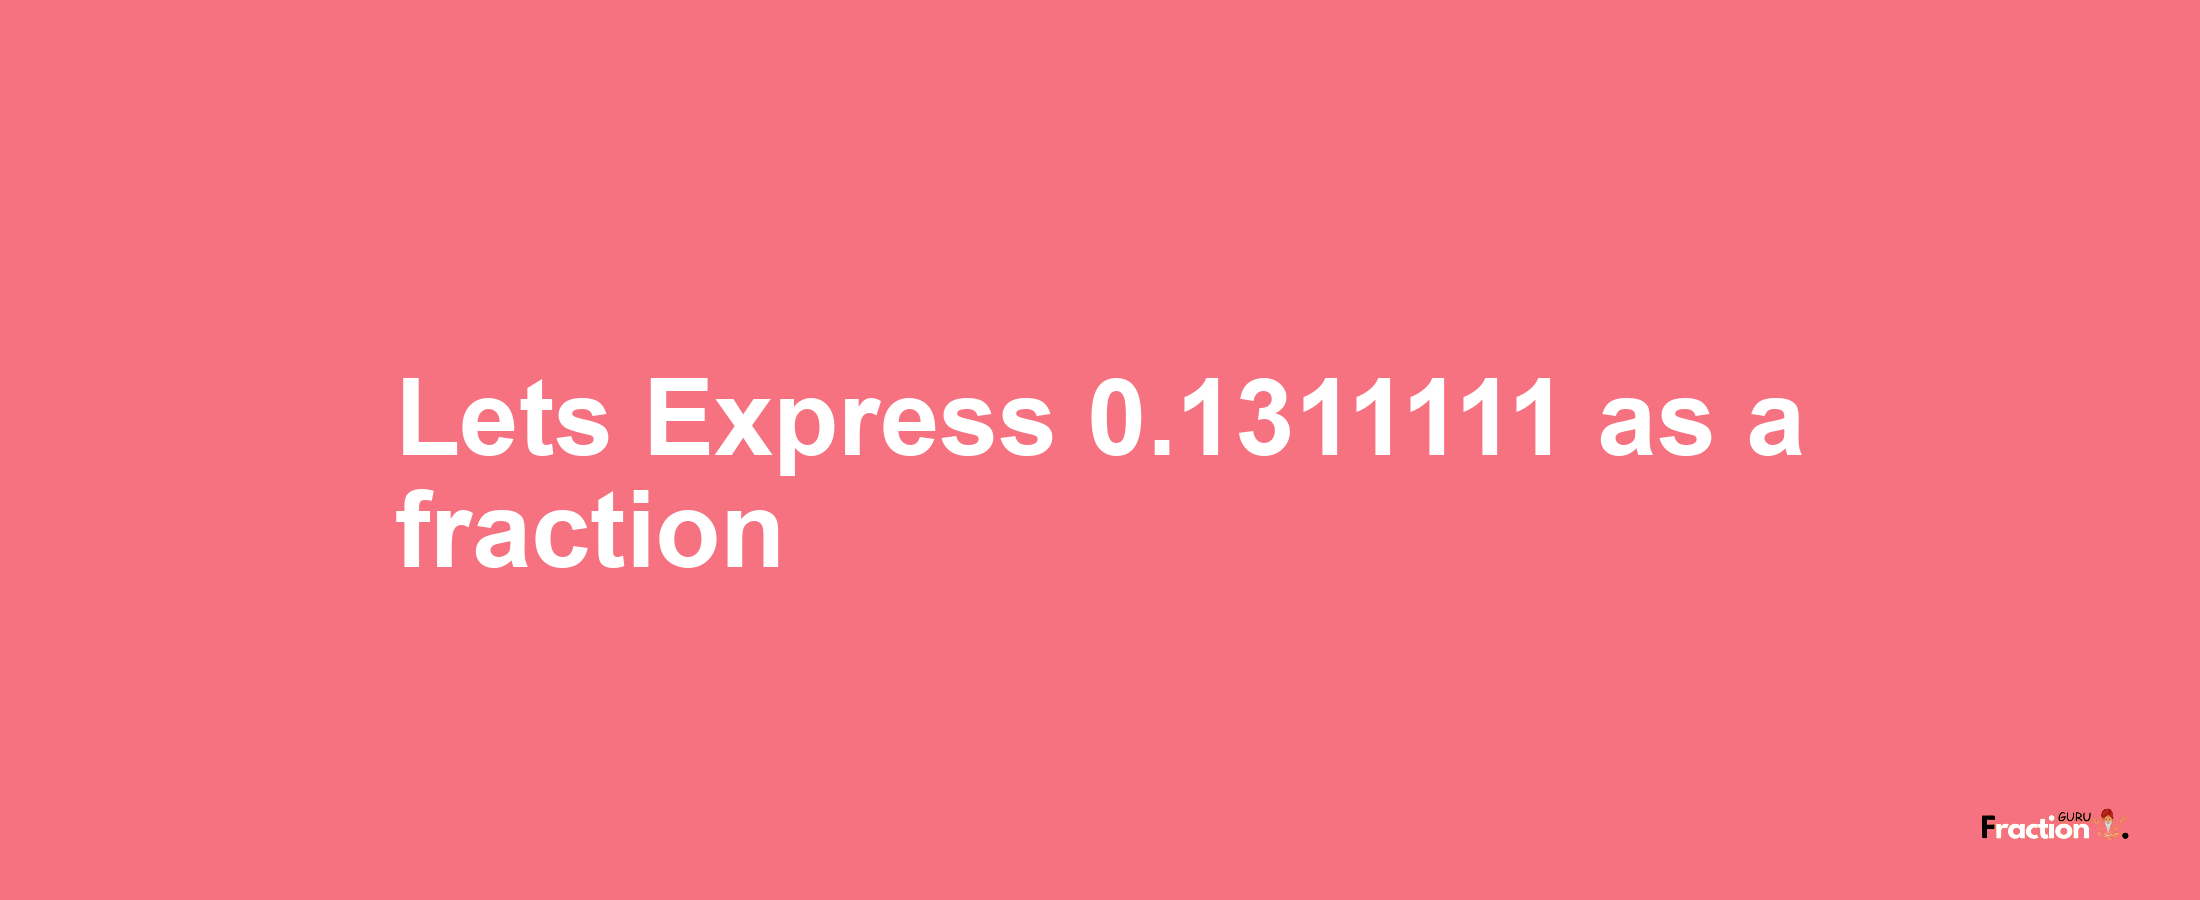 Lets Express 0.1311111 as afraction